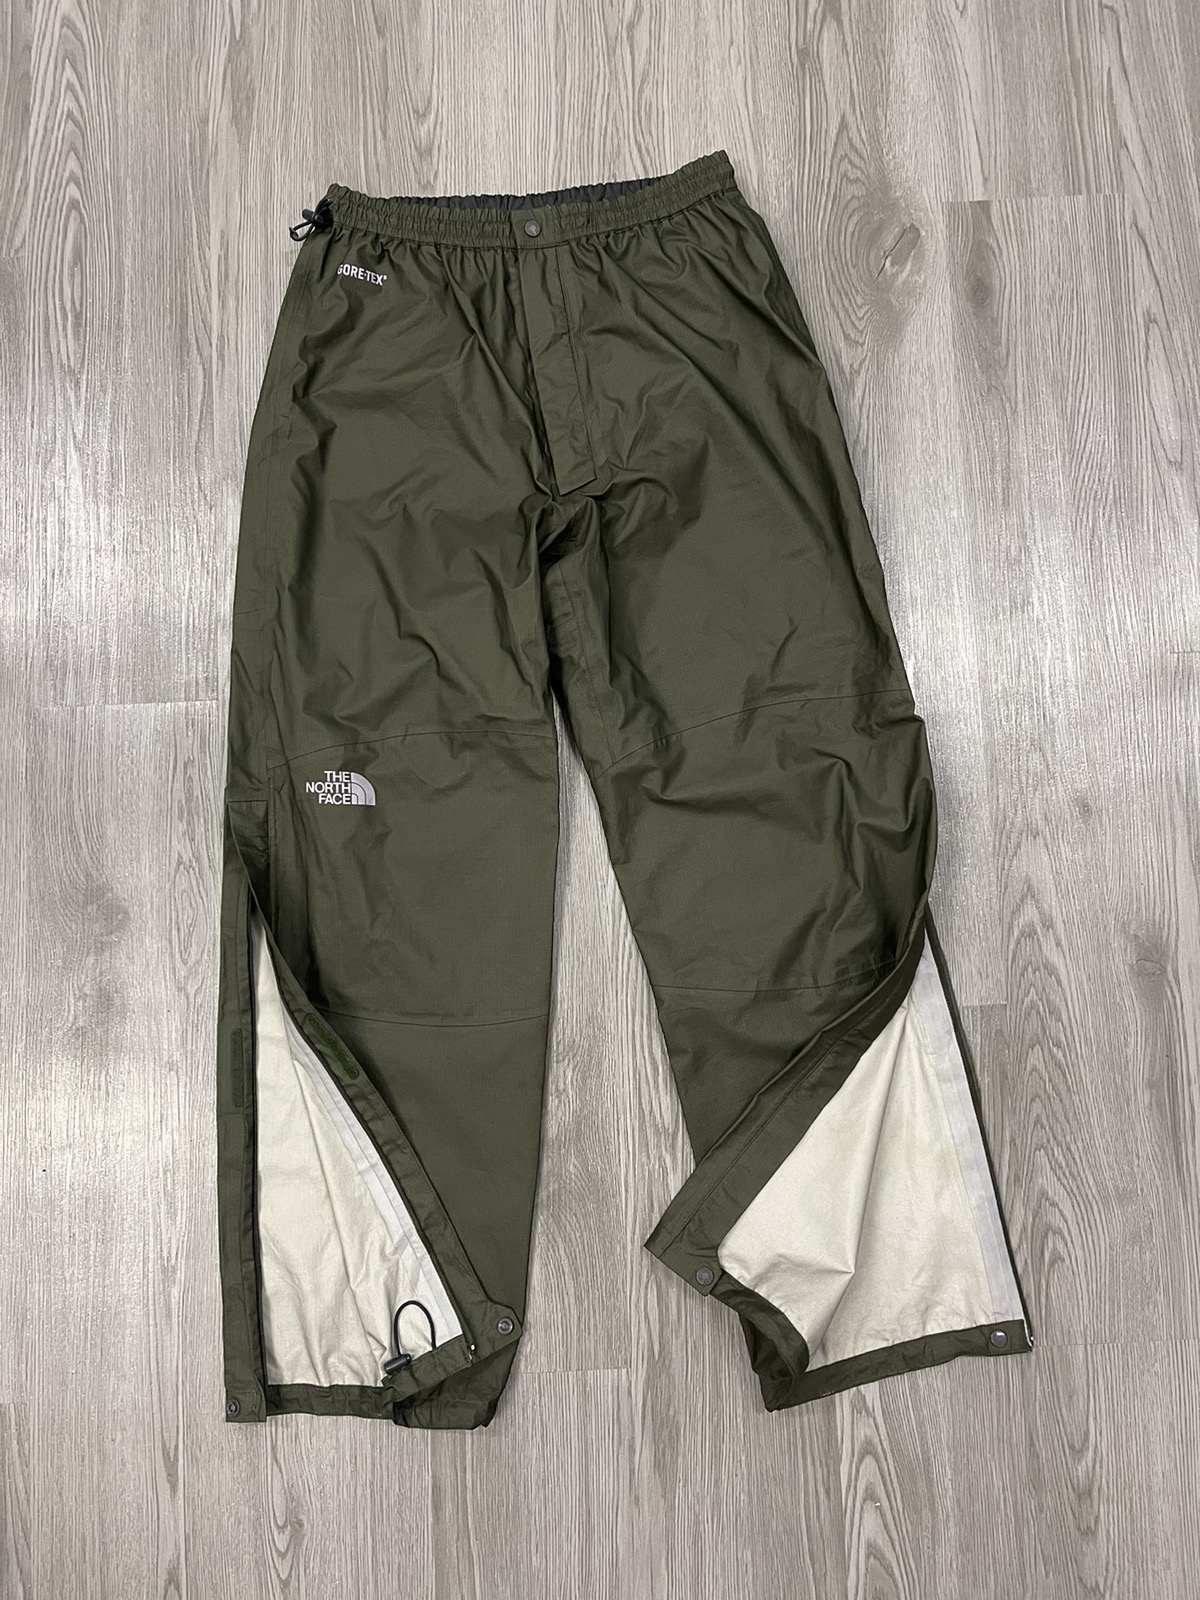 Gorpcore deal🔥The North Face Goretex pant in green - 2